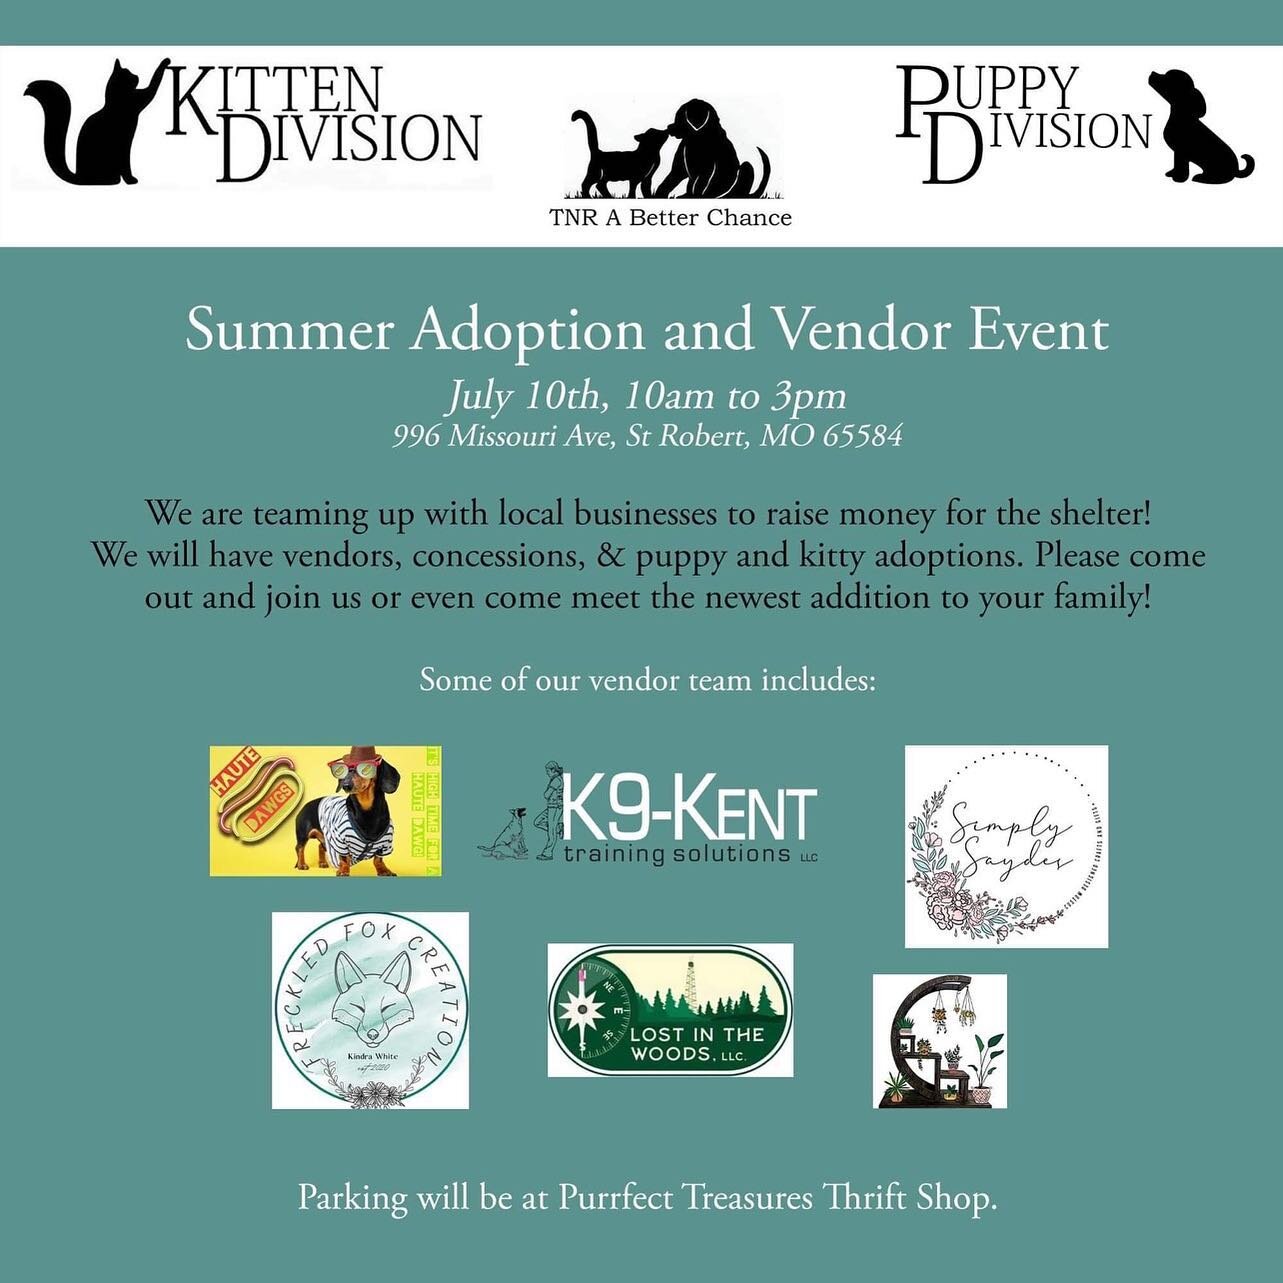 . 🐾🐾 𝑆𝑇𝑅𝑂𝑁𝐺 𝑇𝑂𝐺𝐸𝑇𝐻𝐸𝑅 🐾🐾

Come and join us at the vendor &amp; adoption event from Kitten &amp; Puppy Division Adoption Center in St. Robert 🎉🐕&zwj;🦺🐾😍🐕

We will be there to provide information about
▪️individual dog training 
